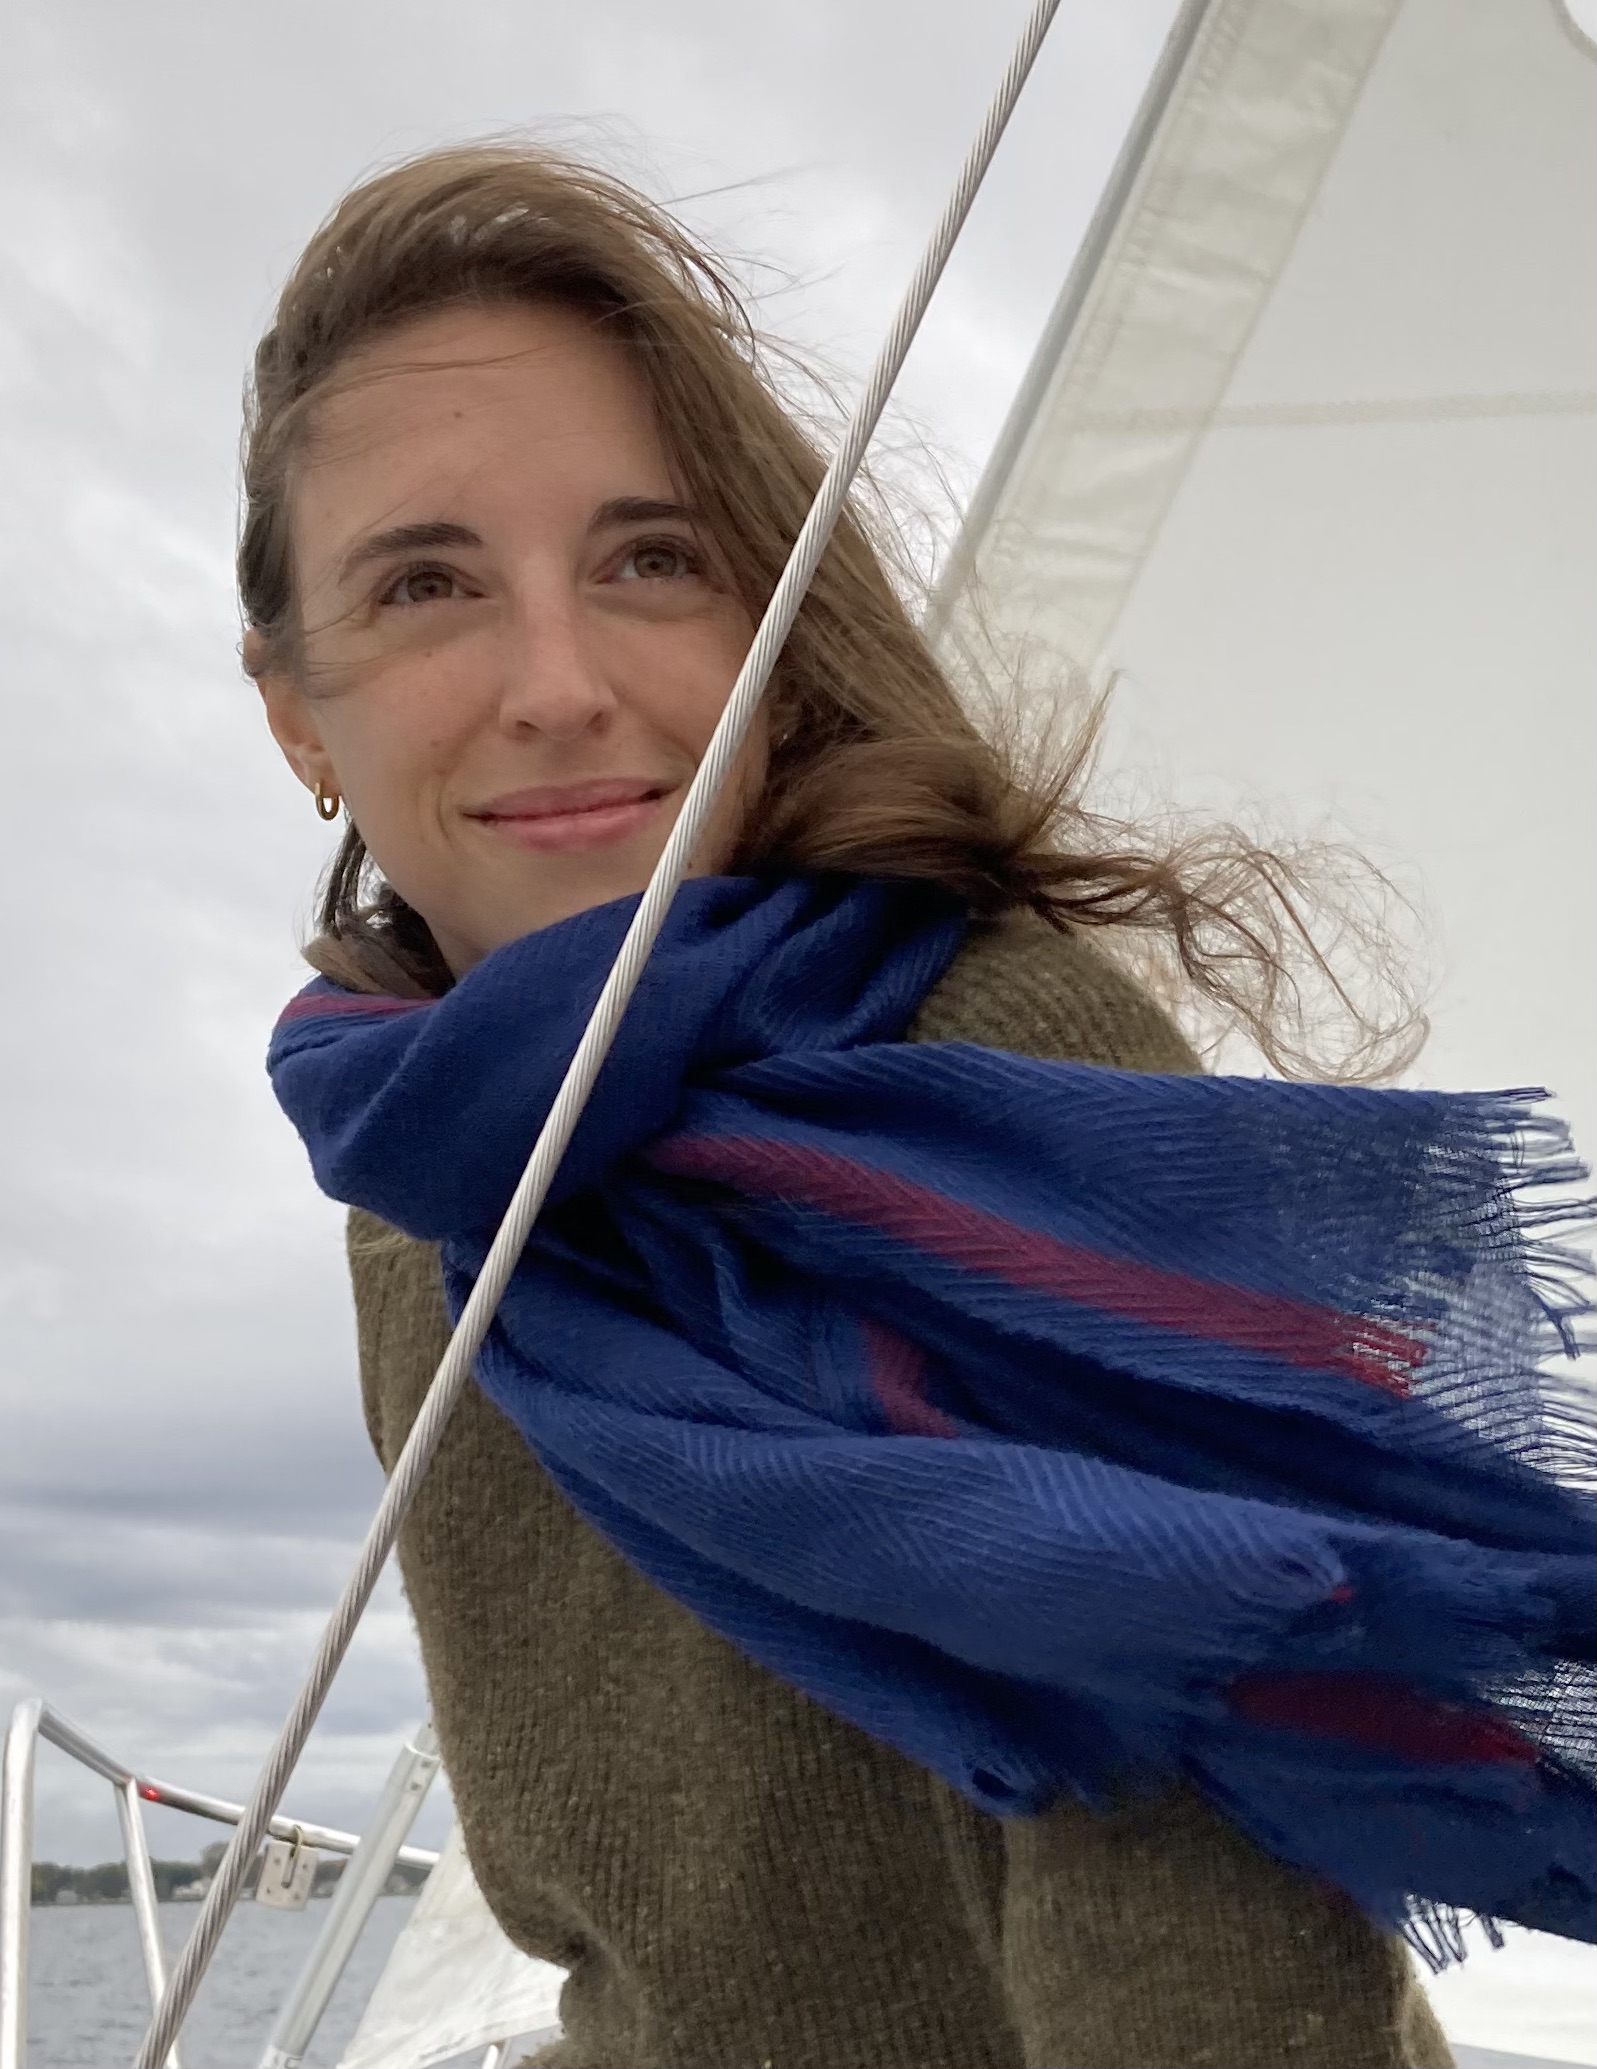 Picture of Anna, a smiling person on a sailboat